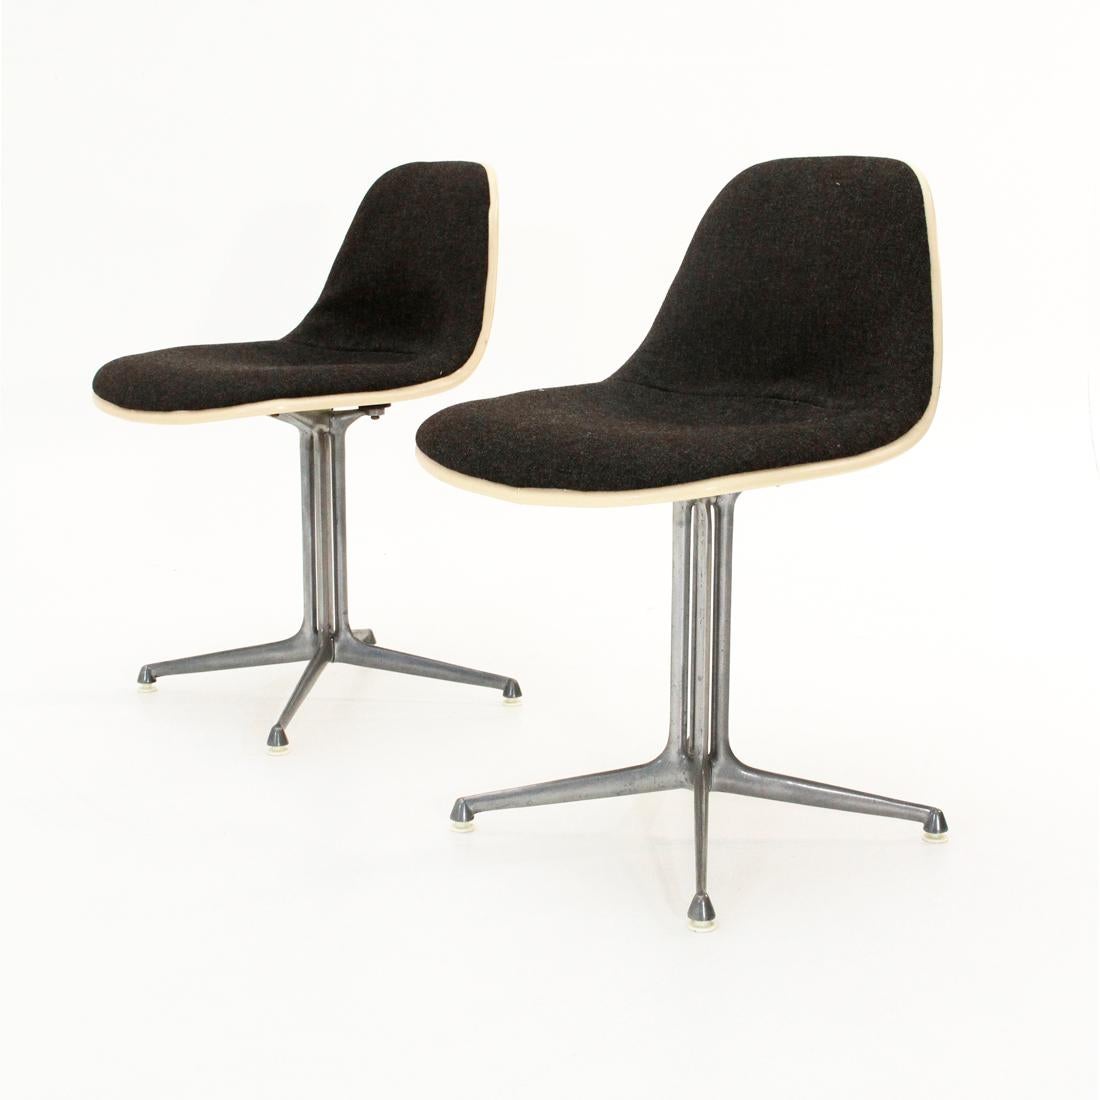 Mid-20th Century Pair of 'La Fonda' Chairs by Charles & Ray Eames for Herman Miller, 1960s